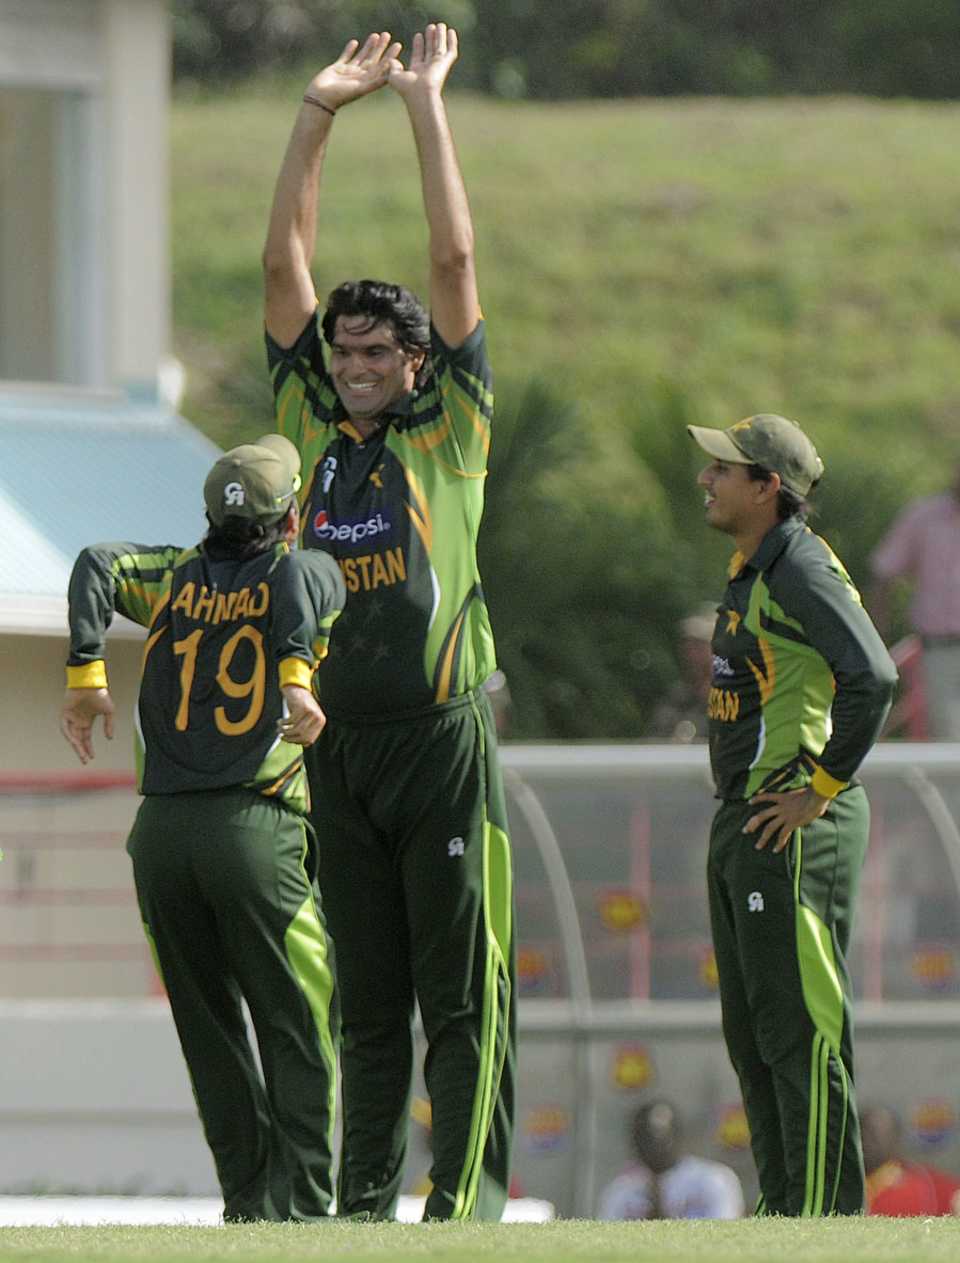 Ahmed Shehzad has plenty of work to do to high-five Mohammad Irfan, West Indies v Pakistan, 3rd ODI, St Lucia, July 19, 2013